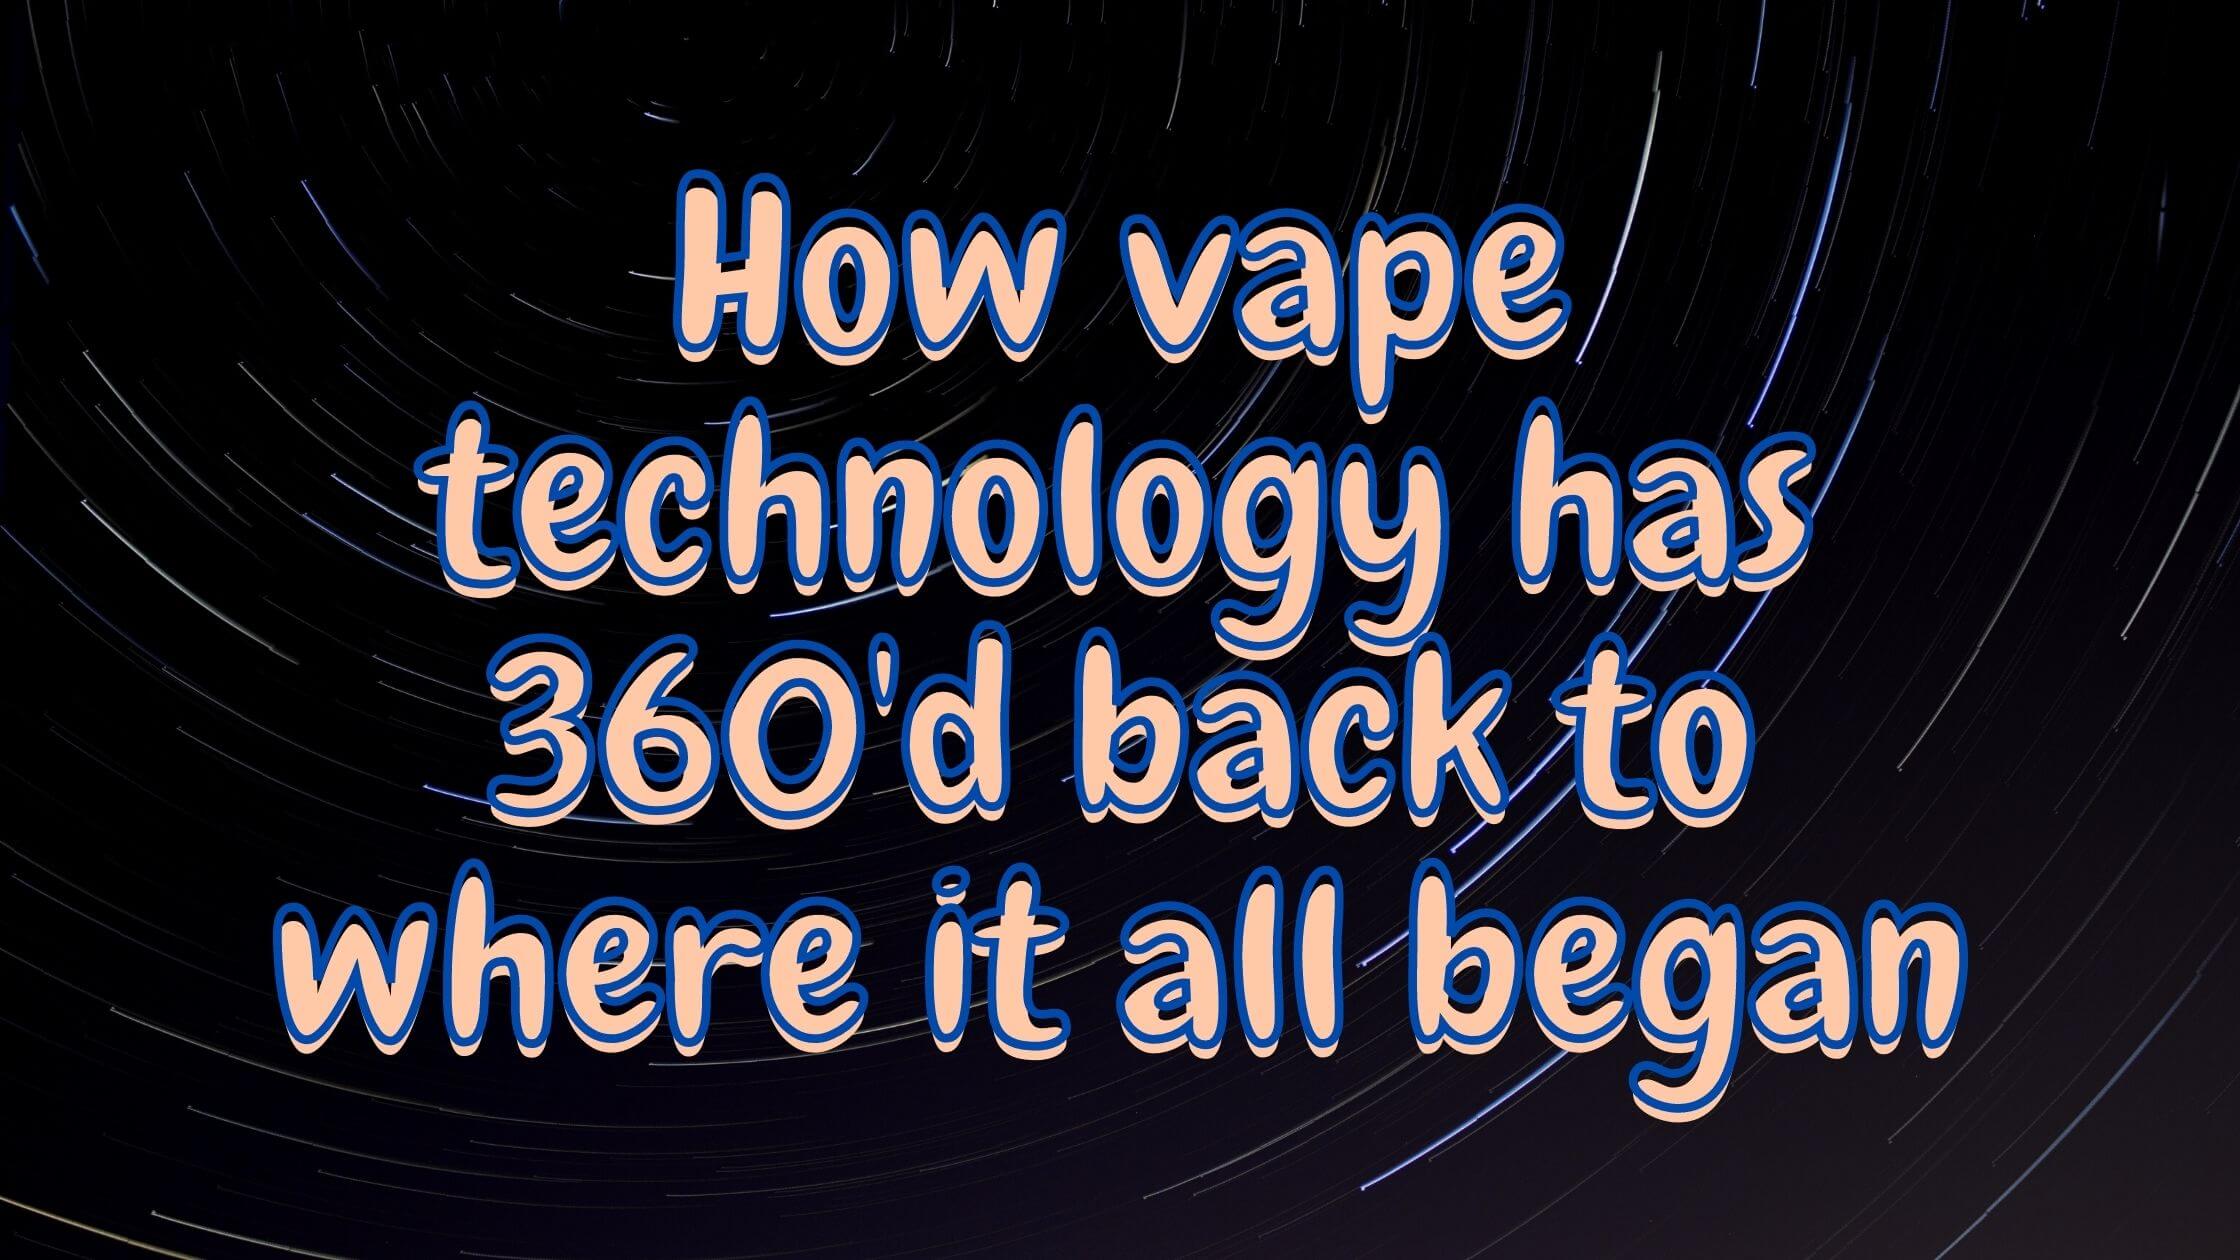 How vape technology has 360'd back to where it all began